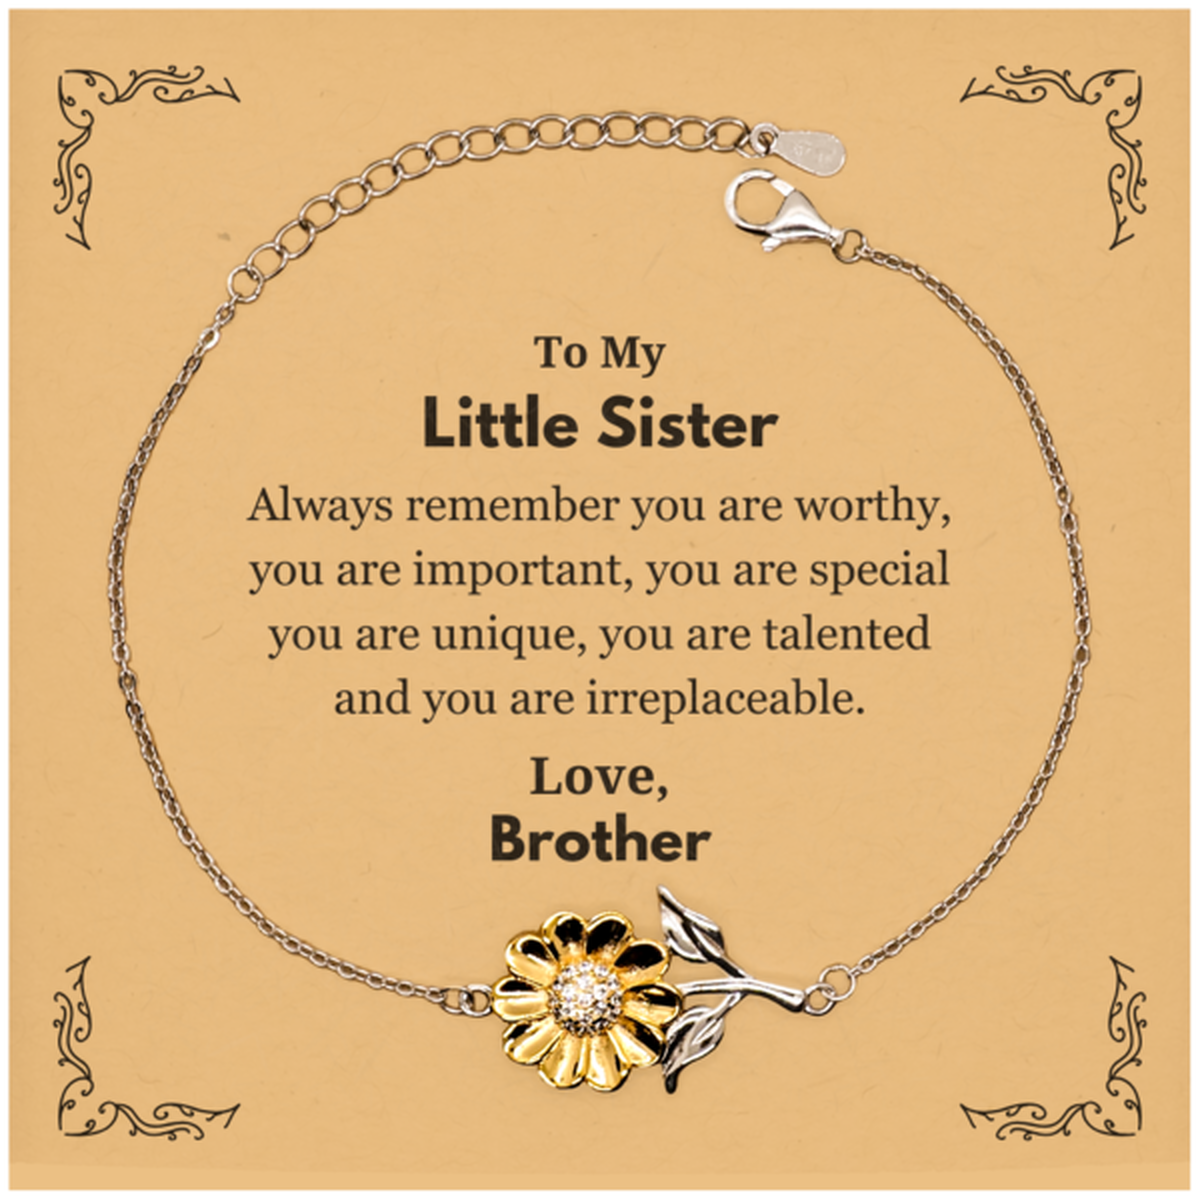 Little Sister Birthday Gifts from Brother, Inspirational Sunflower Bracelet for Little Sister Christmas Graduation Gifts for Little Sister Always remember you are worthy, you are important. Love, Brother